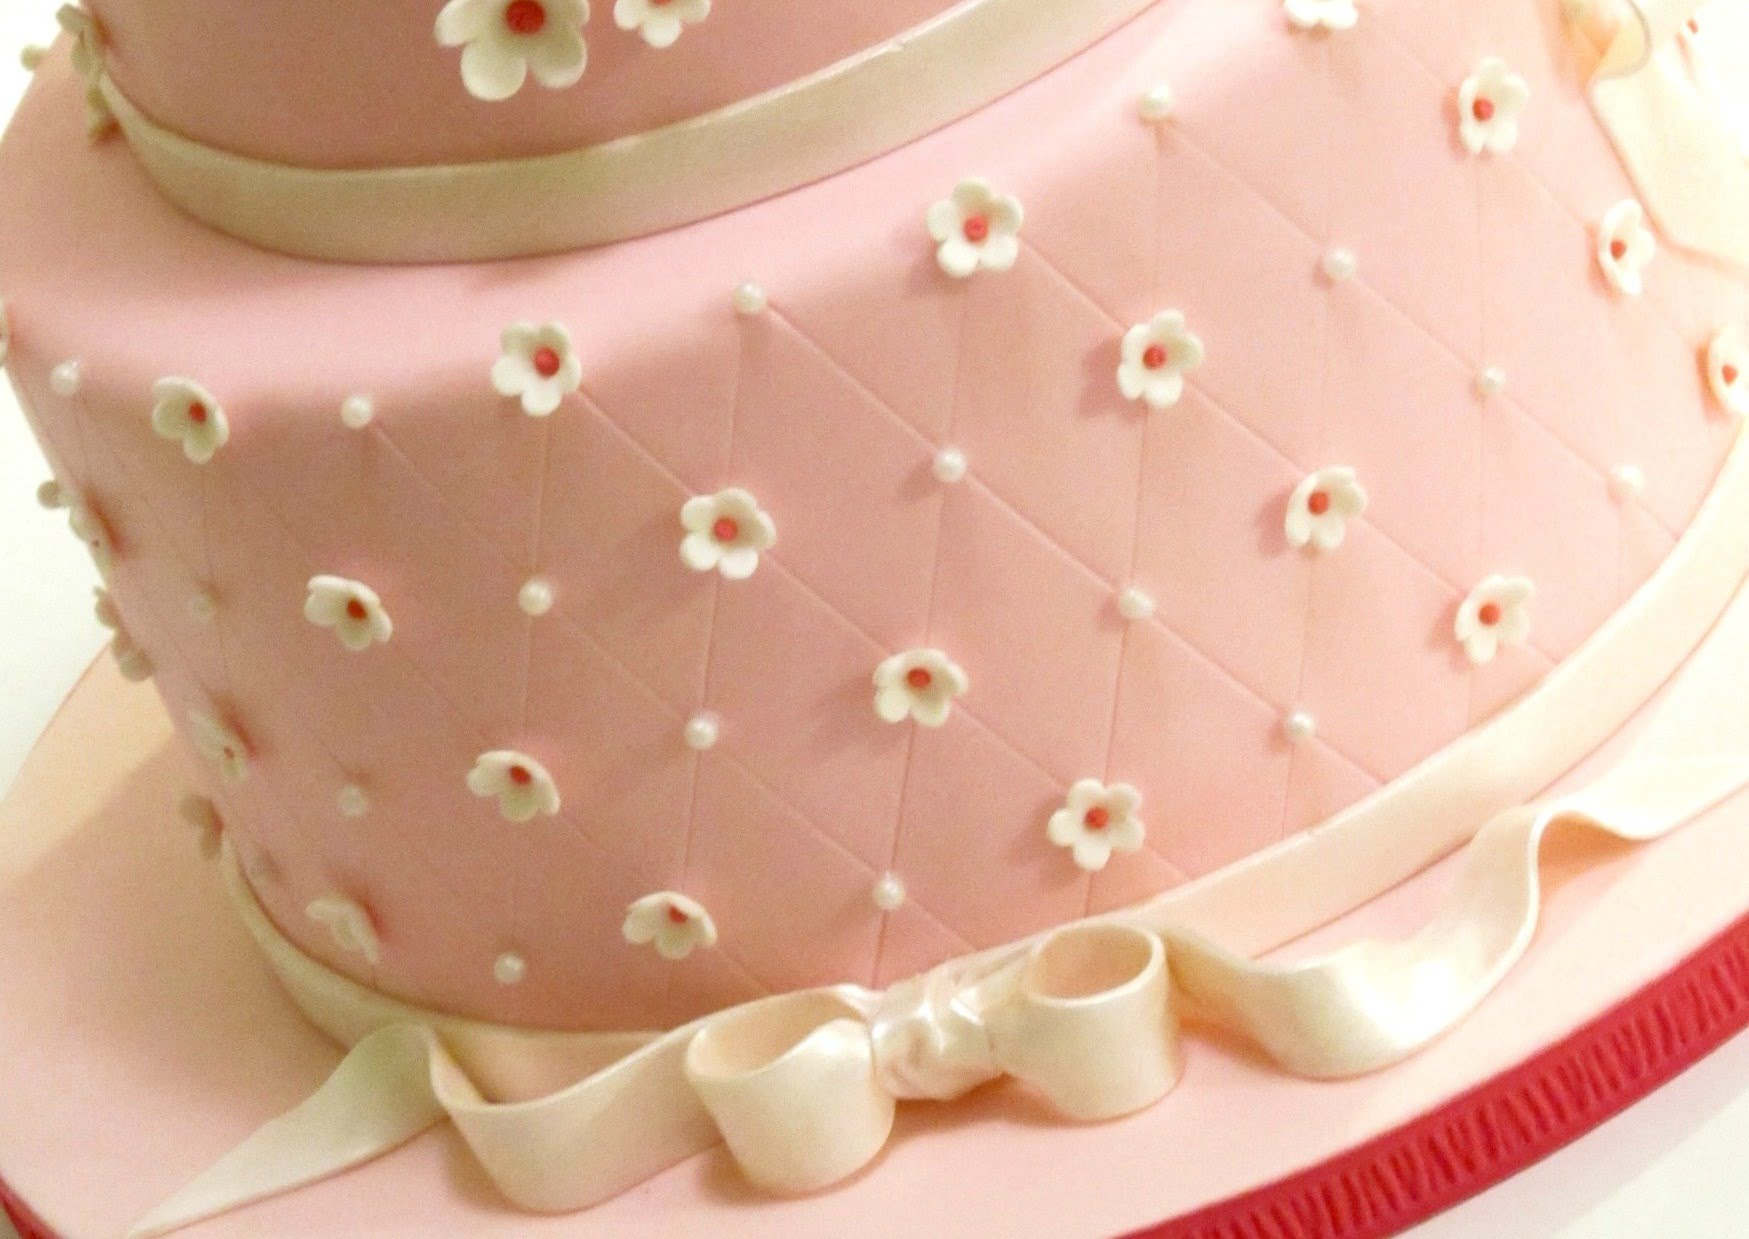 How to Make Quilt Pattern On Fondant Cake